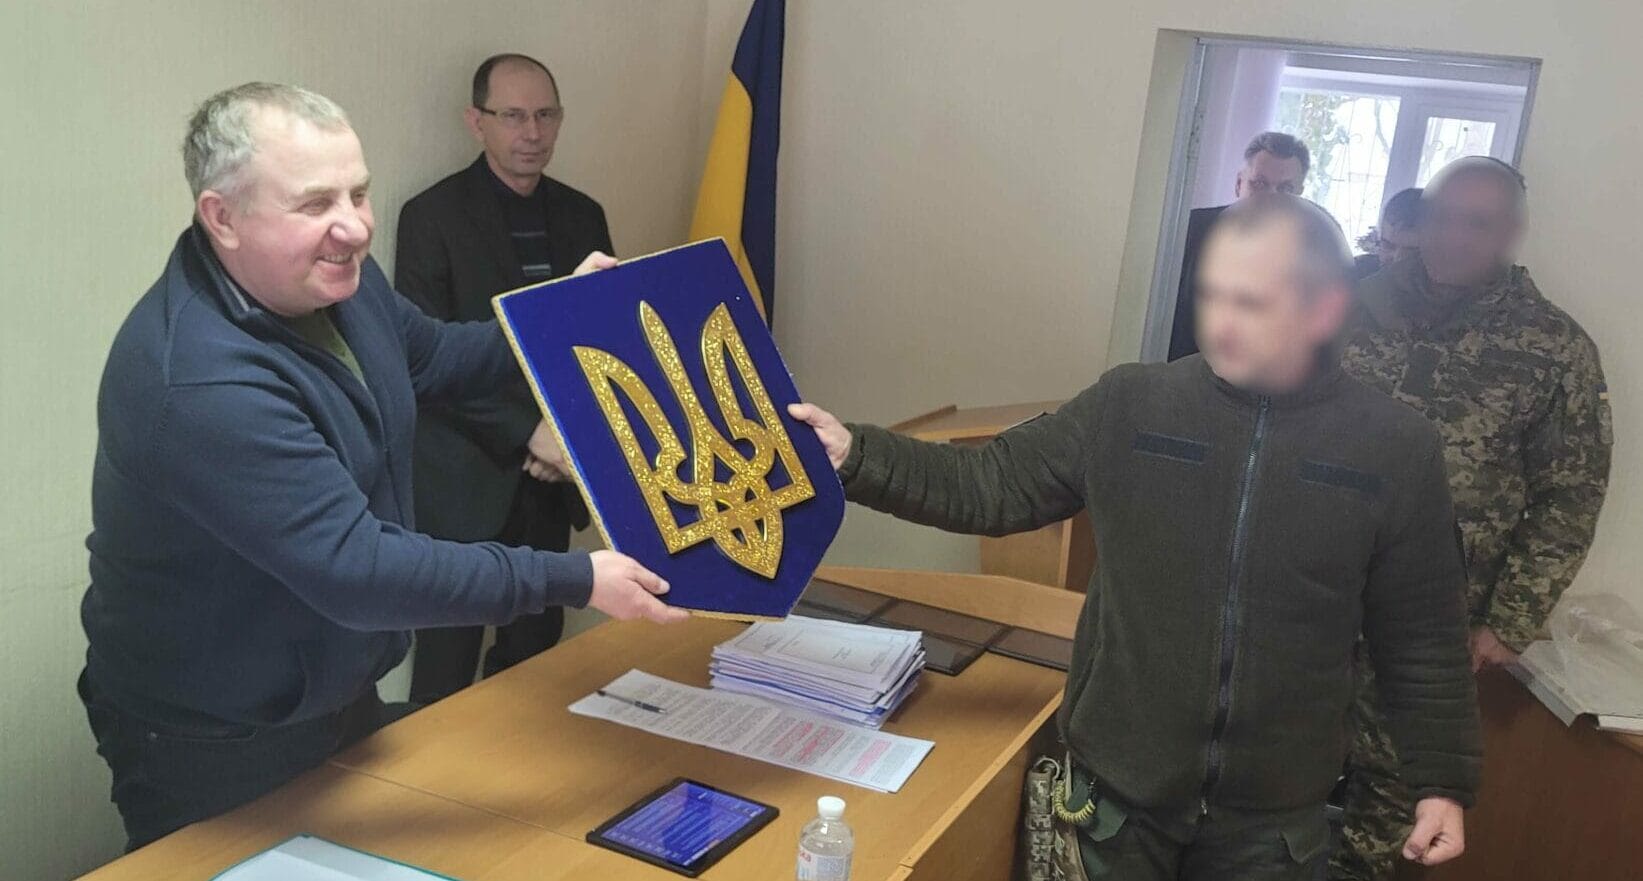 An award being delivered to the mayor of Buryn, Viktor Ladukha, for his support of the Armed Forces of Ukraine